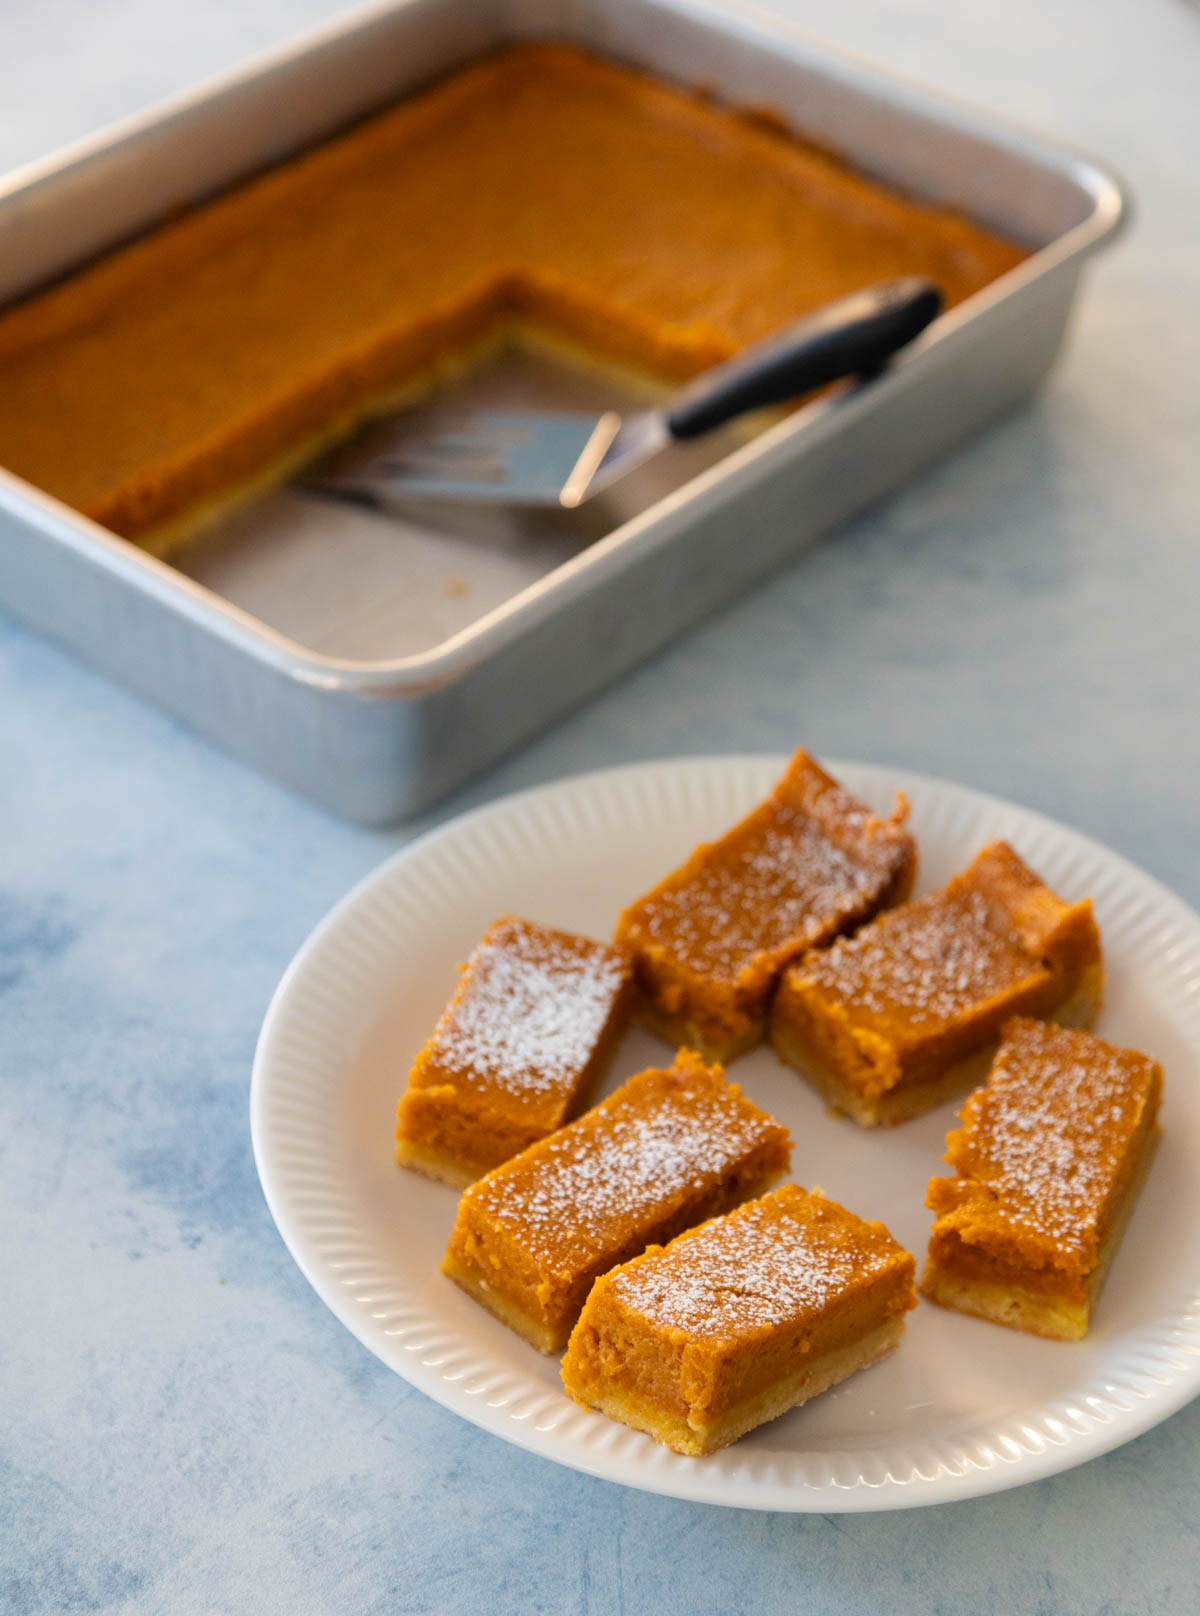 The plate of sliced pumpkin bars sits in front of the baking pan so you can see how neatly they slice.